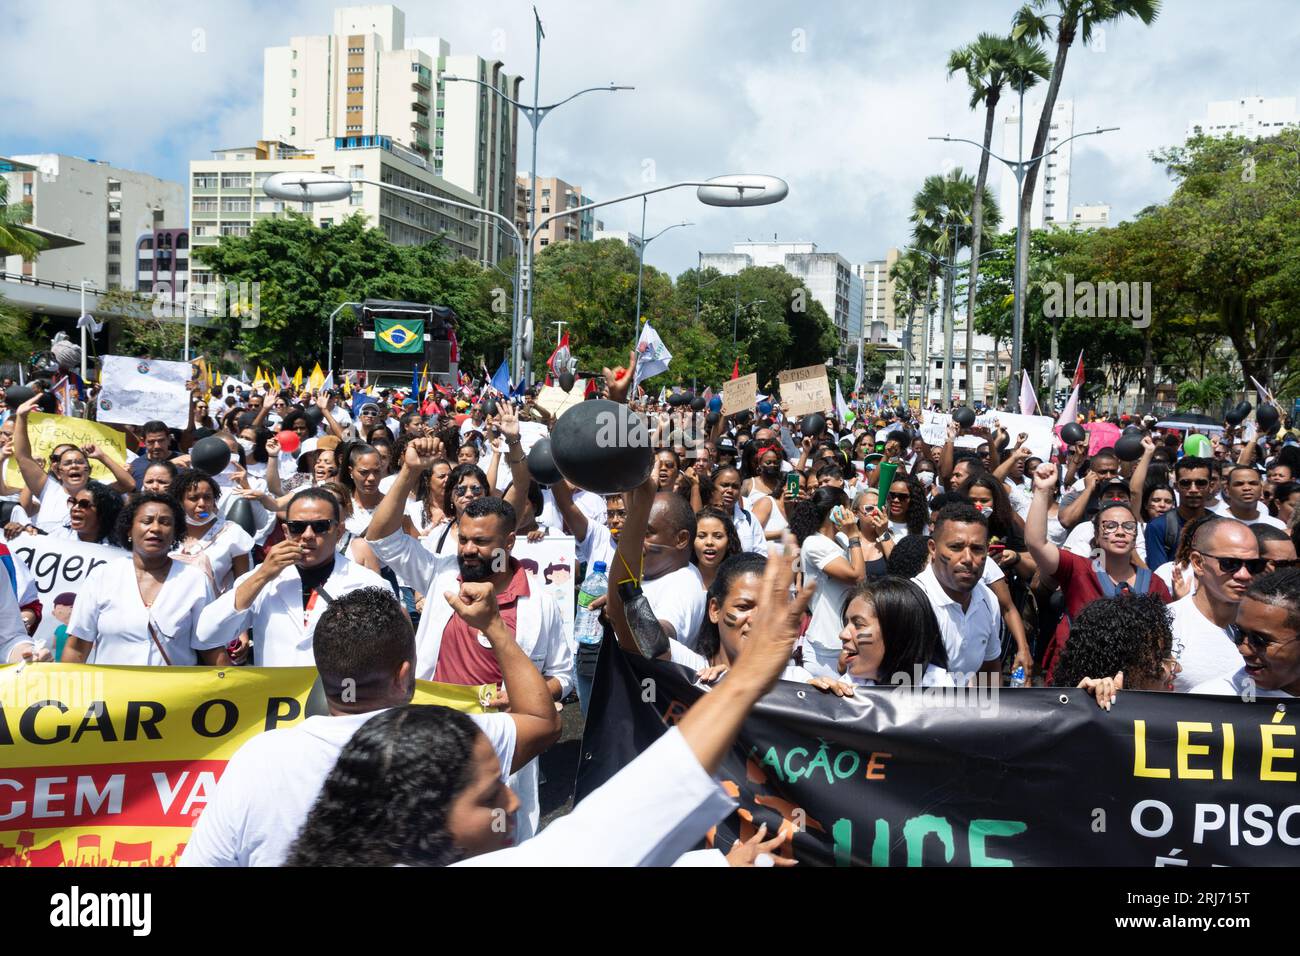 Salvador, Bahia, Brazil - September 07, 2022: Nurses are seen protesting during the Brazilian independence parade in the city of Salvador. Stock Photo